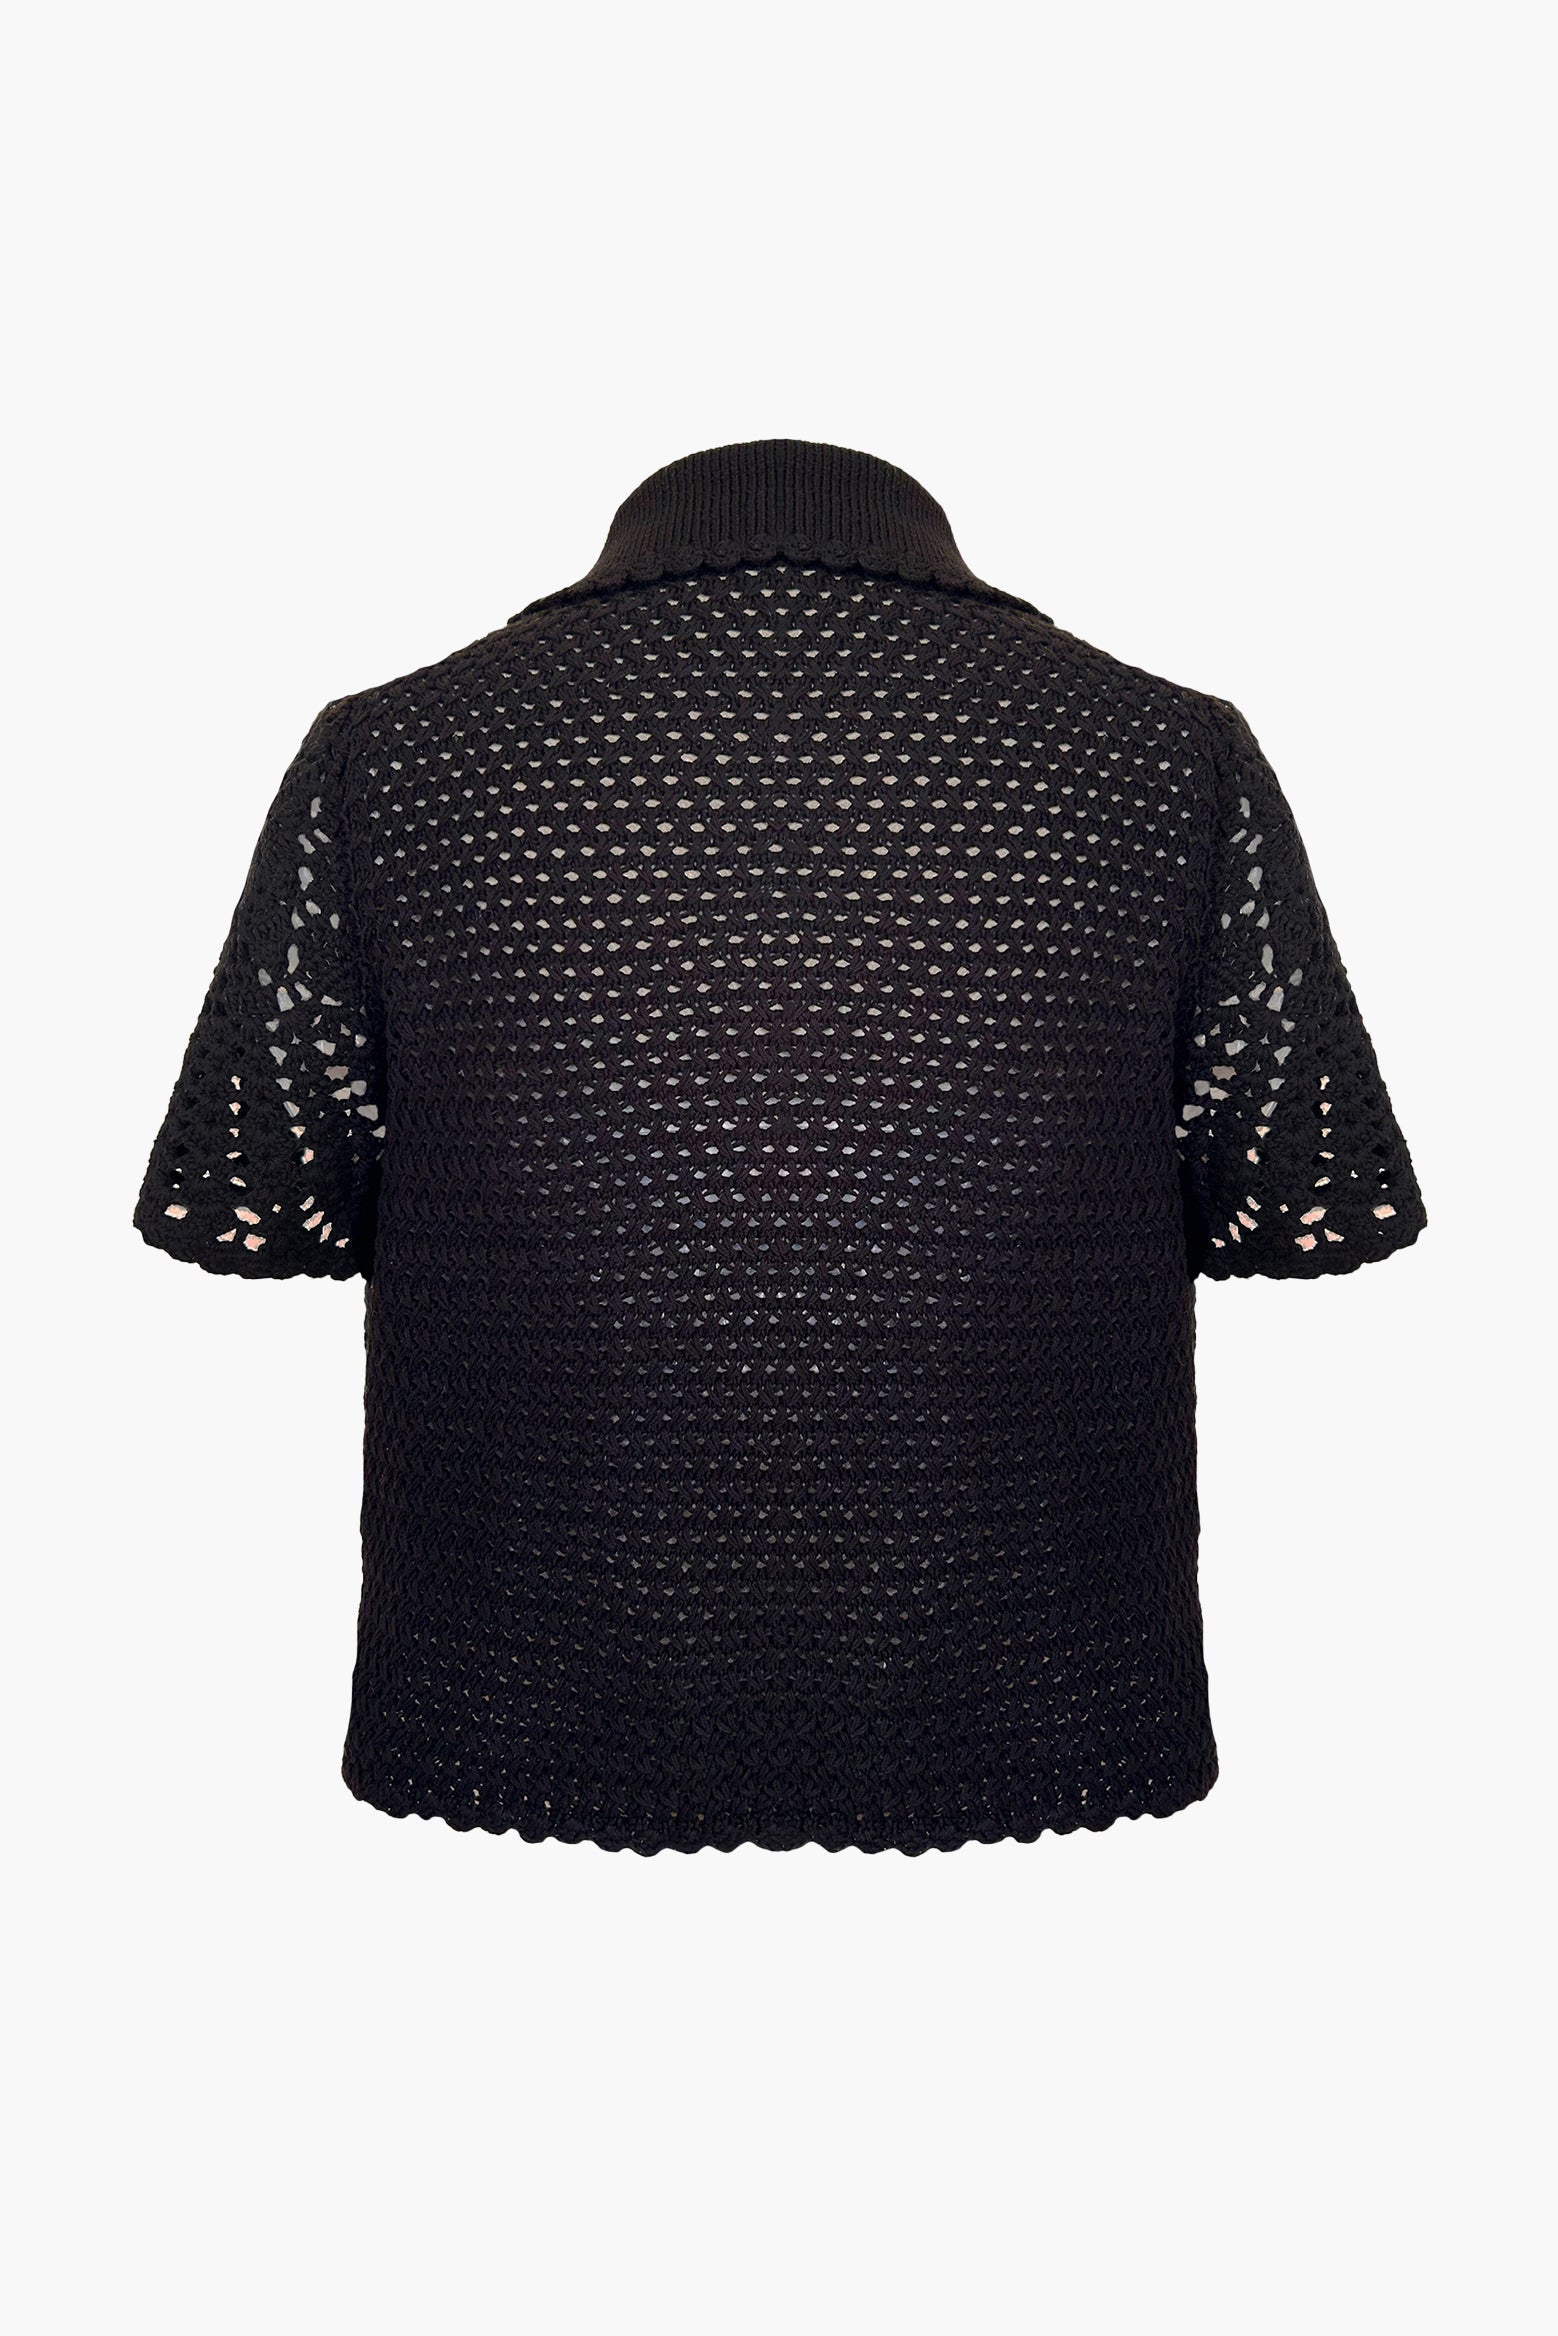 Lovaan Lily Polo in Black available at The New Trend Australia.